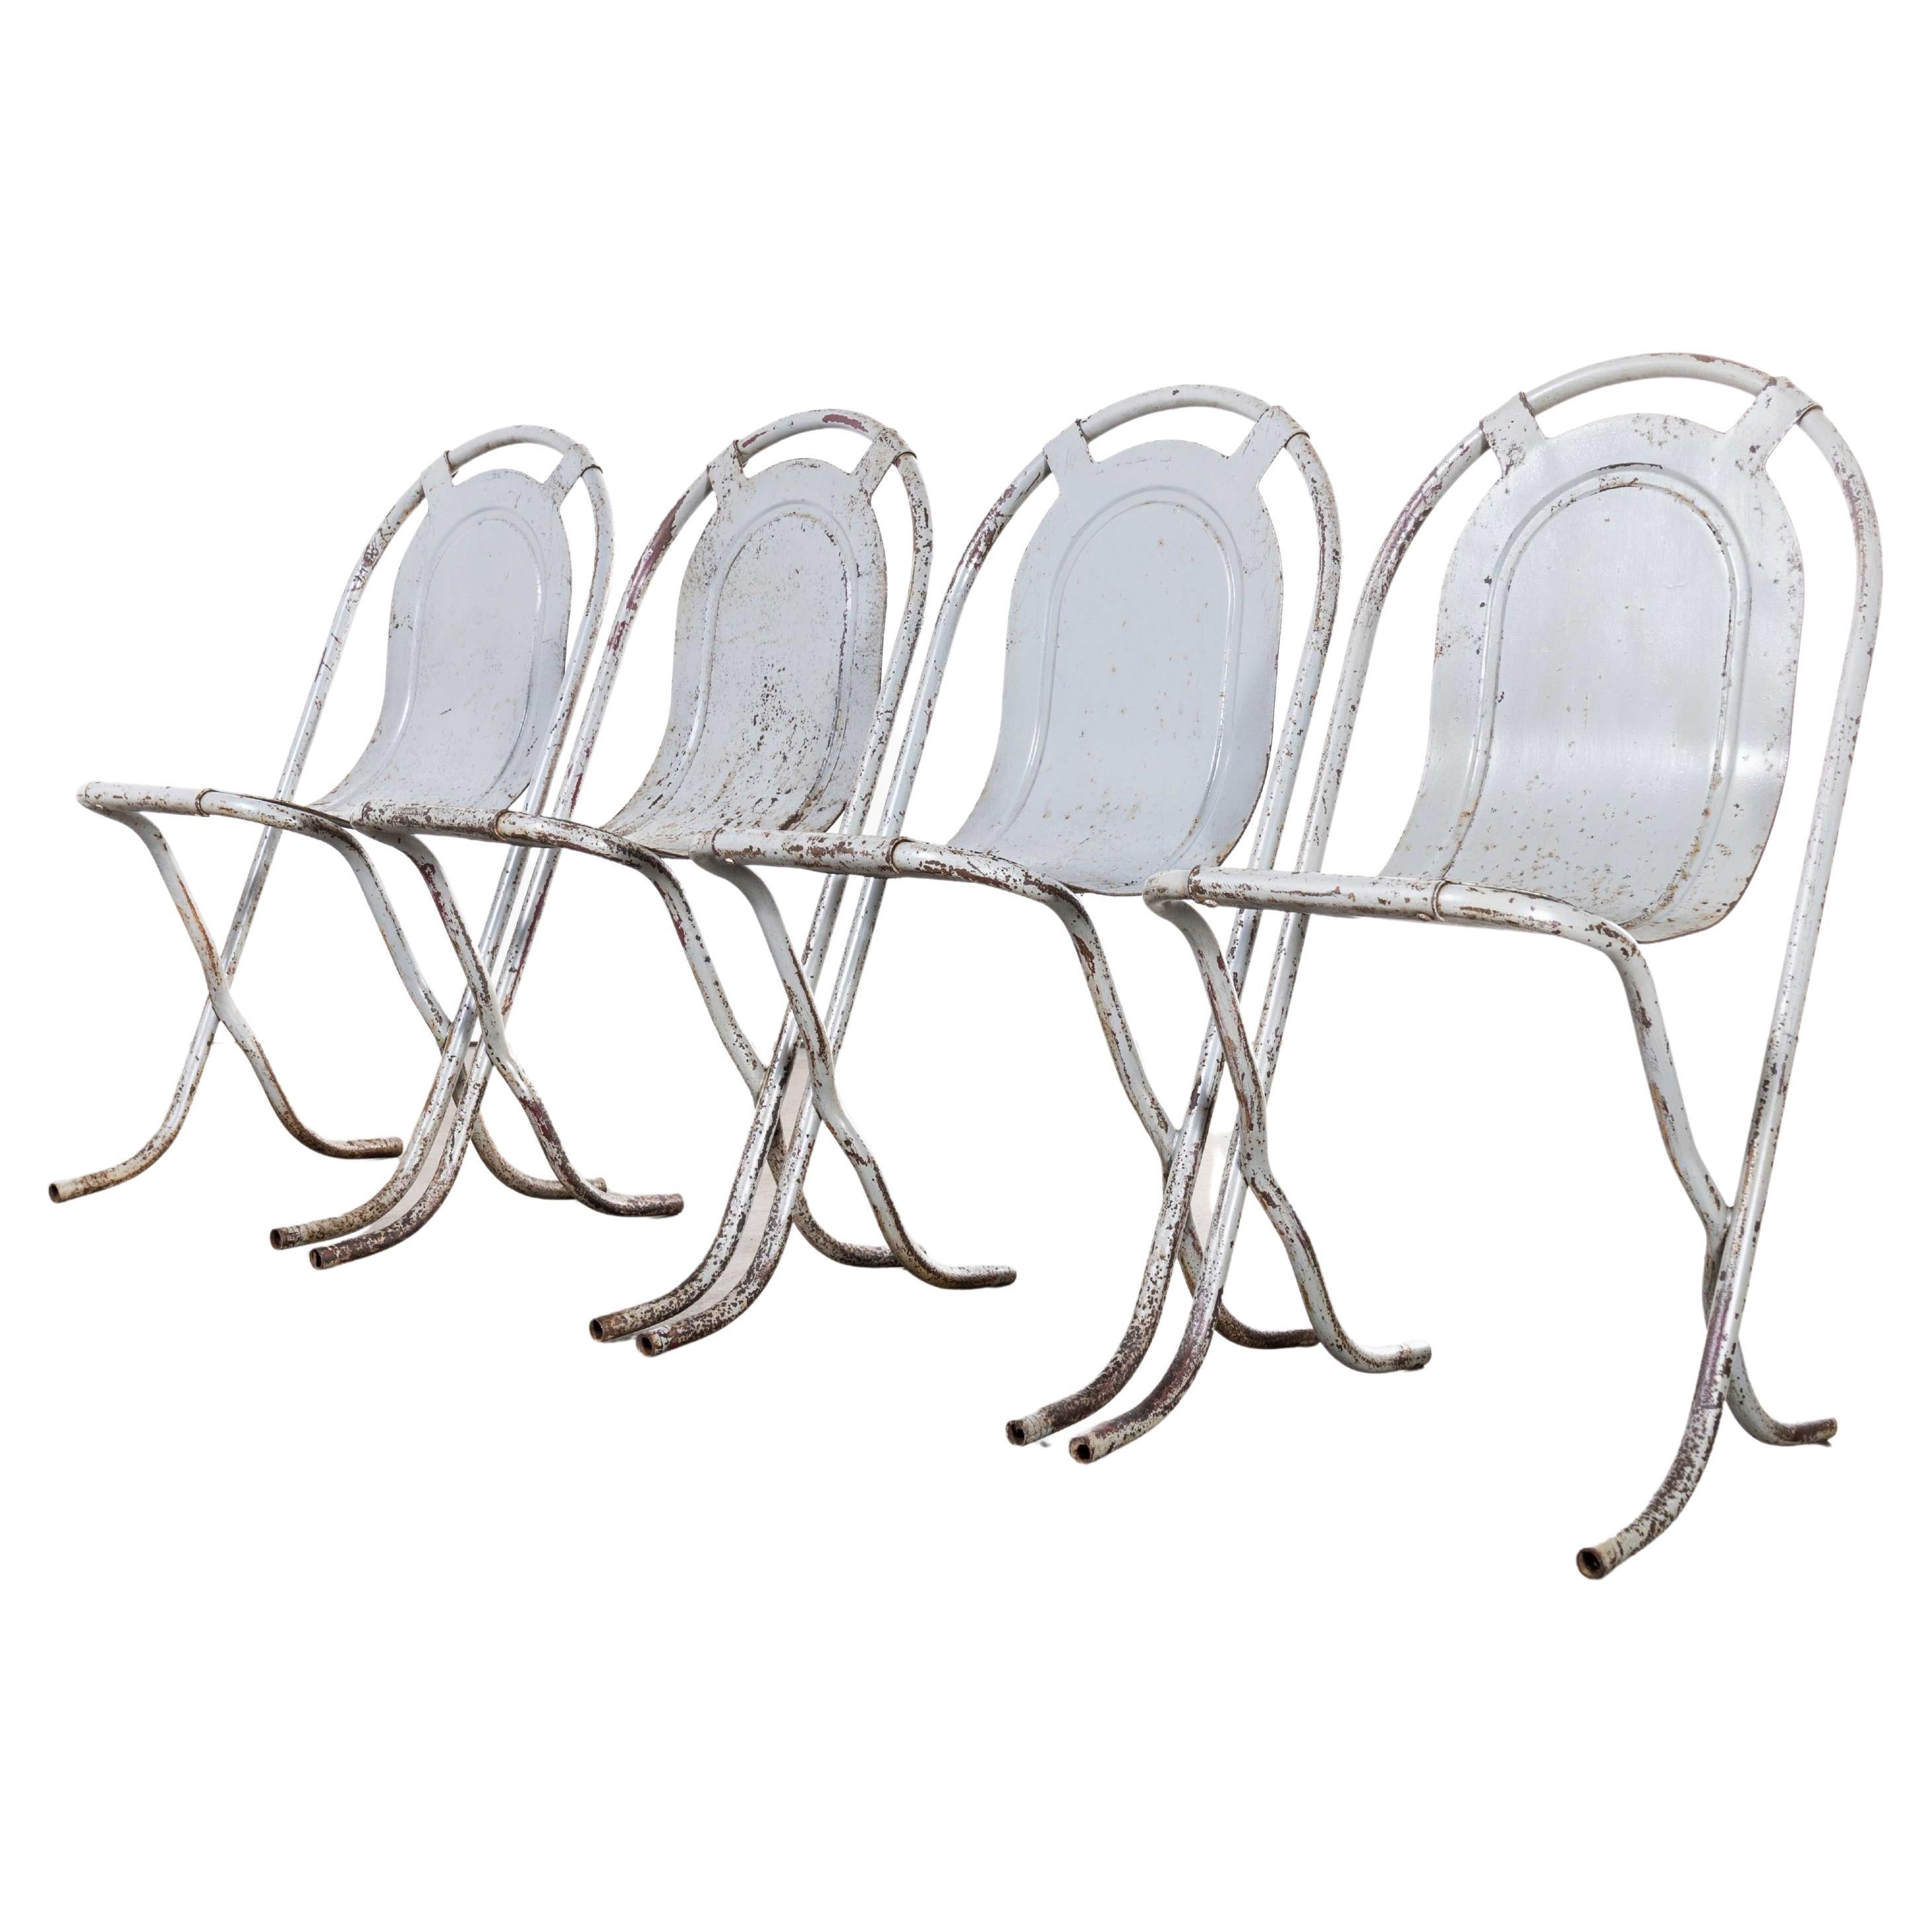 1940s Original British Stak a Bye Chairs, Grey, Set of Four For Sale